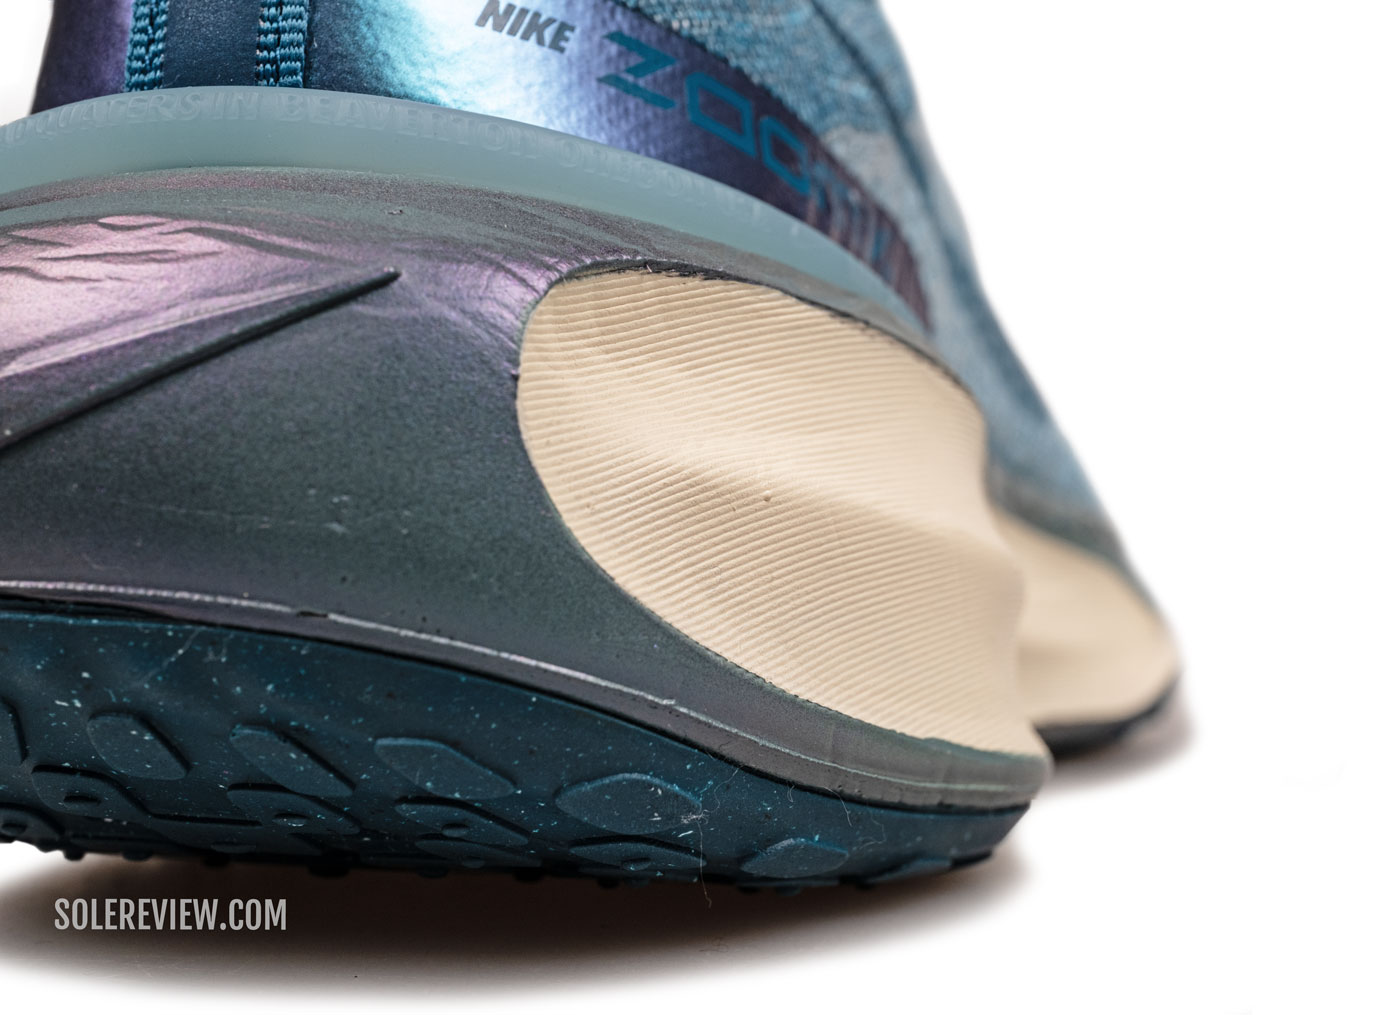 The grooved sidewall of the Nike ZoomX Invincible Run 3.